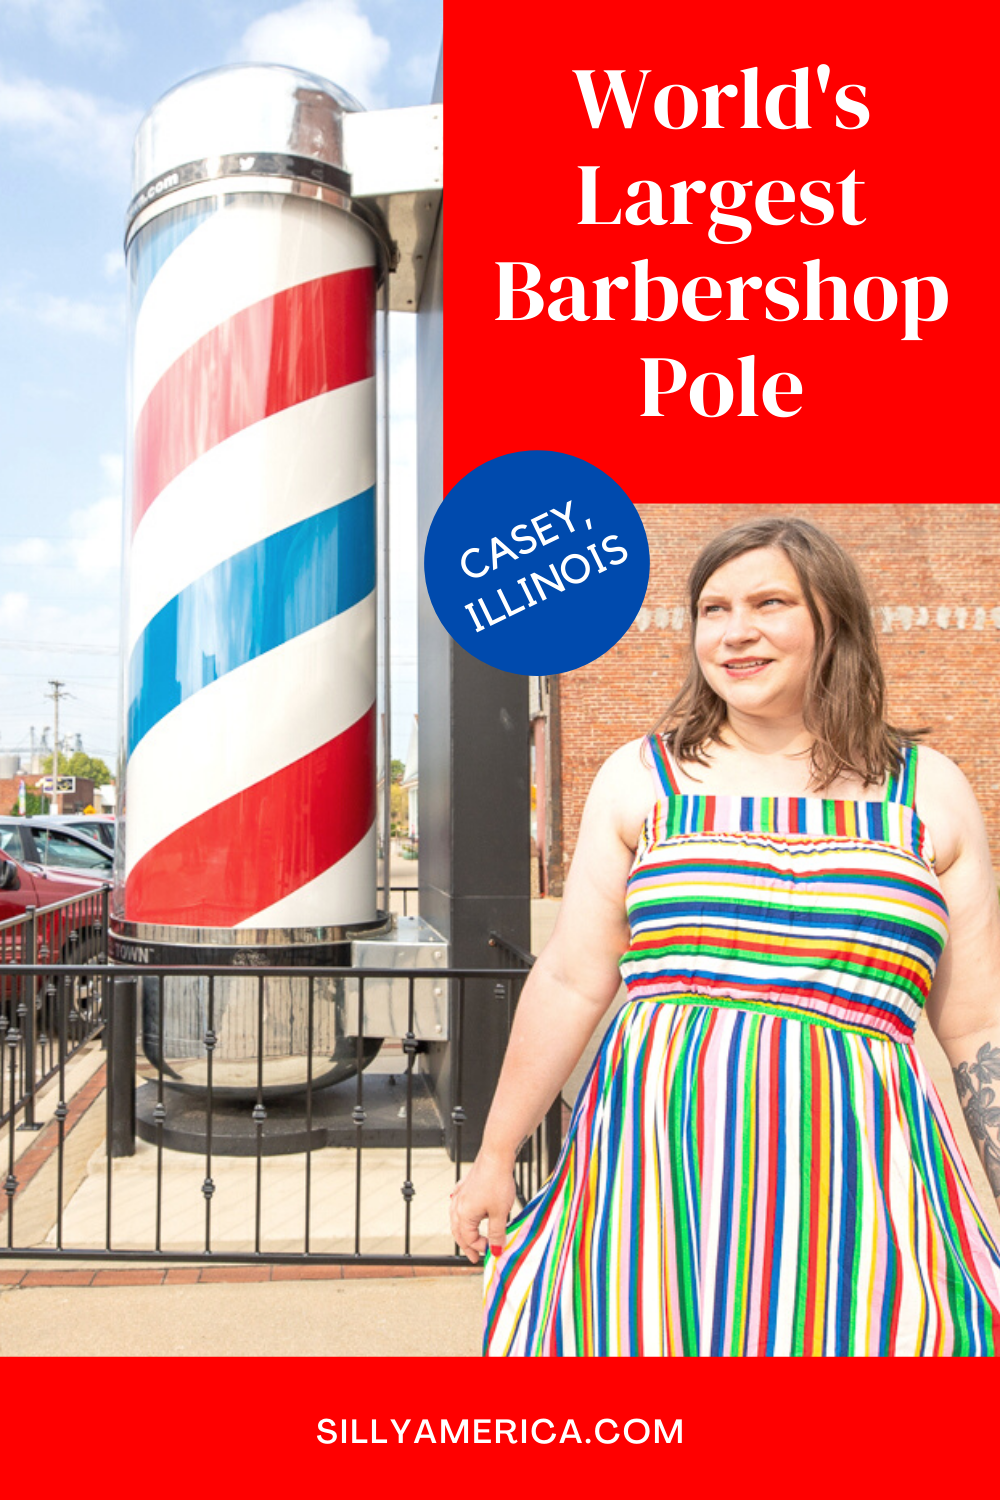 This Illinois roadside attraction might just be a cut above the rest — it’s the world’s largest barbershop pole in Casey, Illinois. At 14 feet tall and 3 feet 11 inches wide, this Illinois roadside attraction is a hair above ten times the size of the standard.  #IllinoisRoadsideAttractions #IllinoisRoadsideAttraction #RoadsideAttractions #RoadsideAttraction #RoadTrip #IllinoisRoadTrip #IllinoisWeekendGetaways #IllinoisWithKids #IllinoisRoadTripTravel